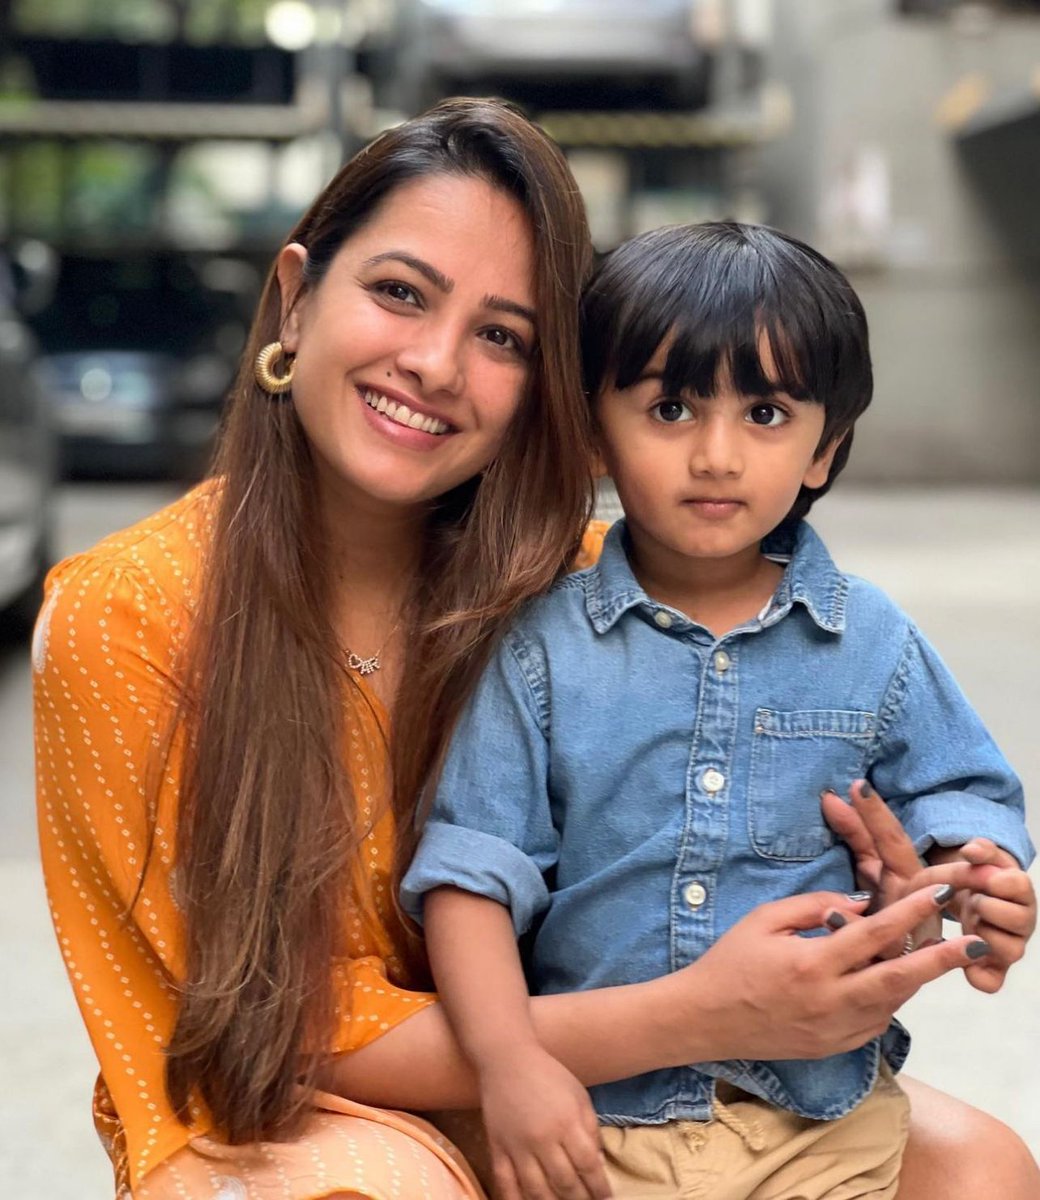 Actress #AnitaHassanandani, who made her debut on television in 1998 with '#IdharUdhar', said being the mother is the most challenging role to play, and she feels the mom guilt when on the shoot.